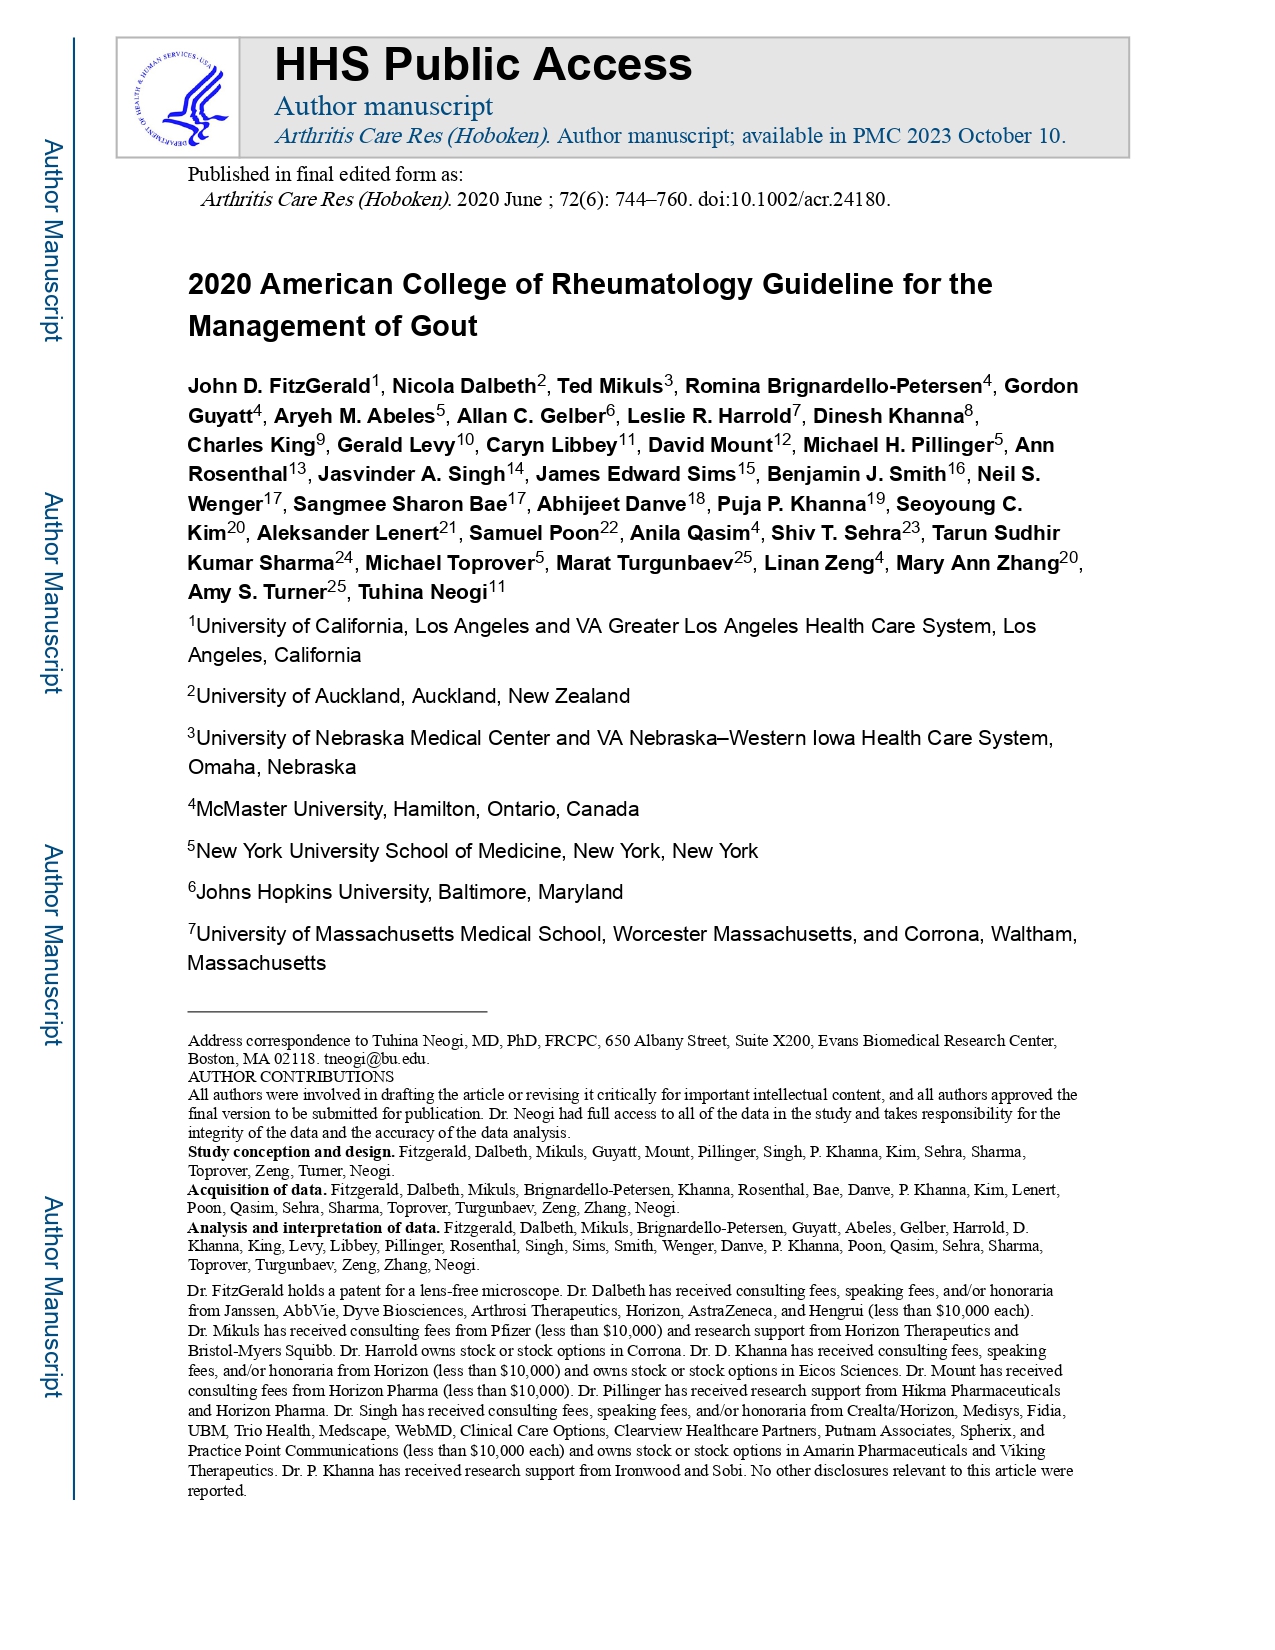 2020 American College of Rheumatology Guideline for the Management of Gout (ACR 2020)